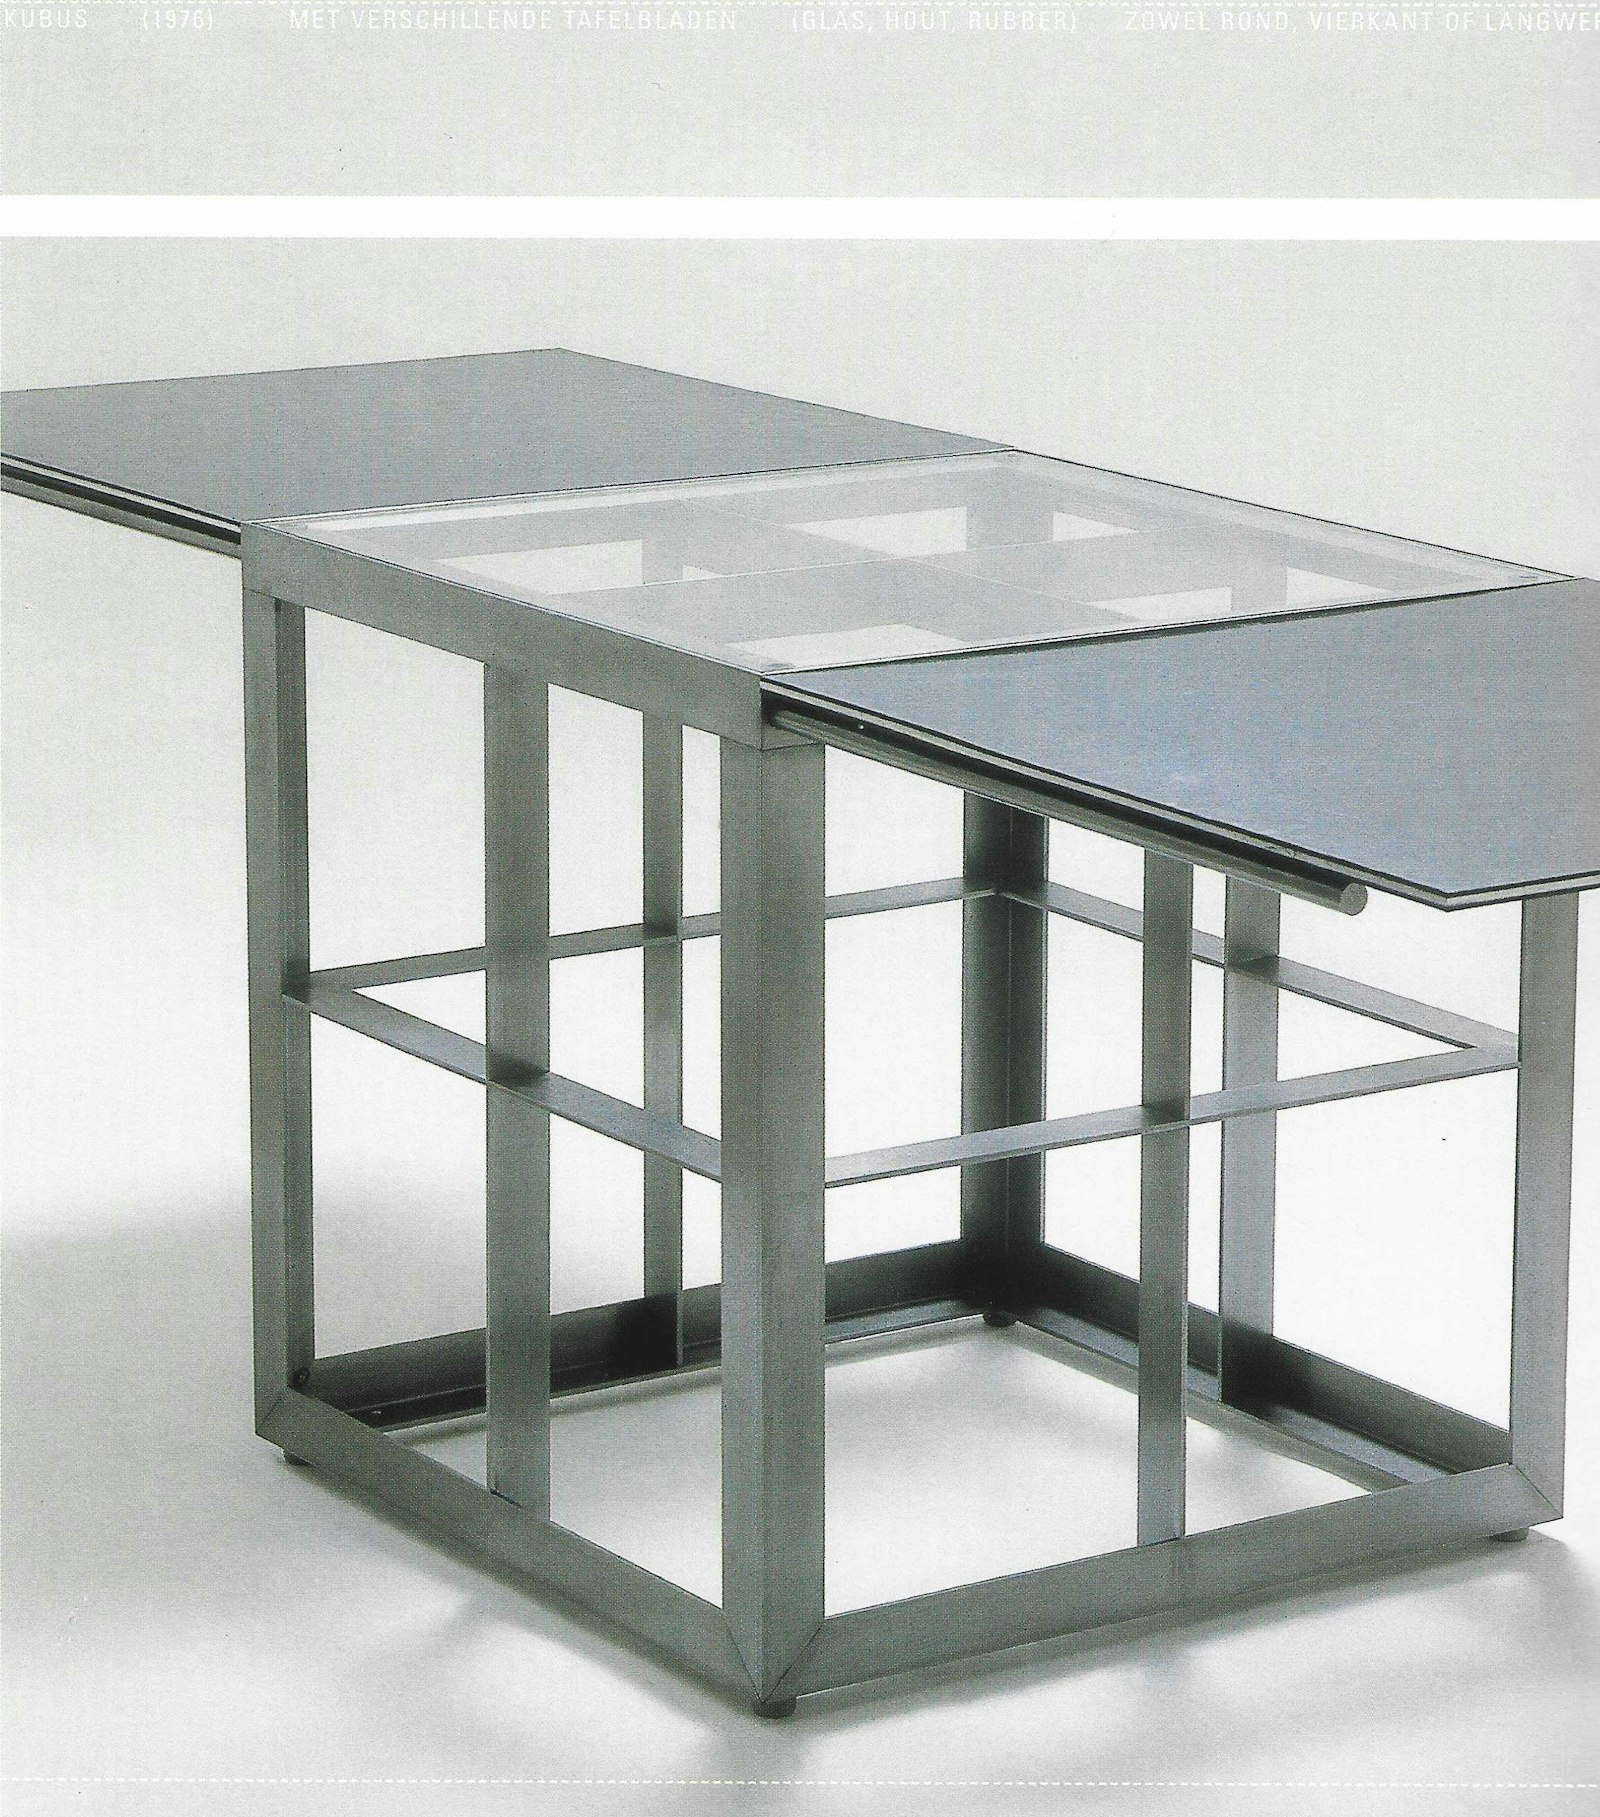 'Kubus' (1976) with different table tops (glass, wood, rubber), either round, square or oblong